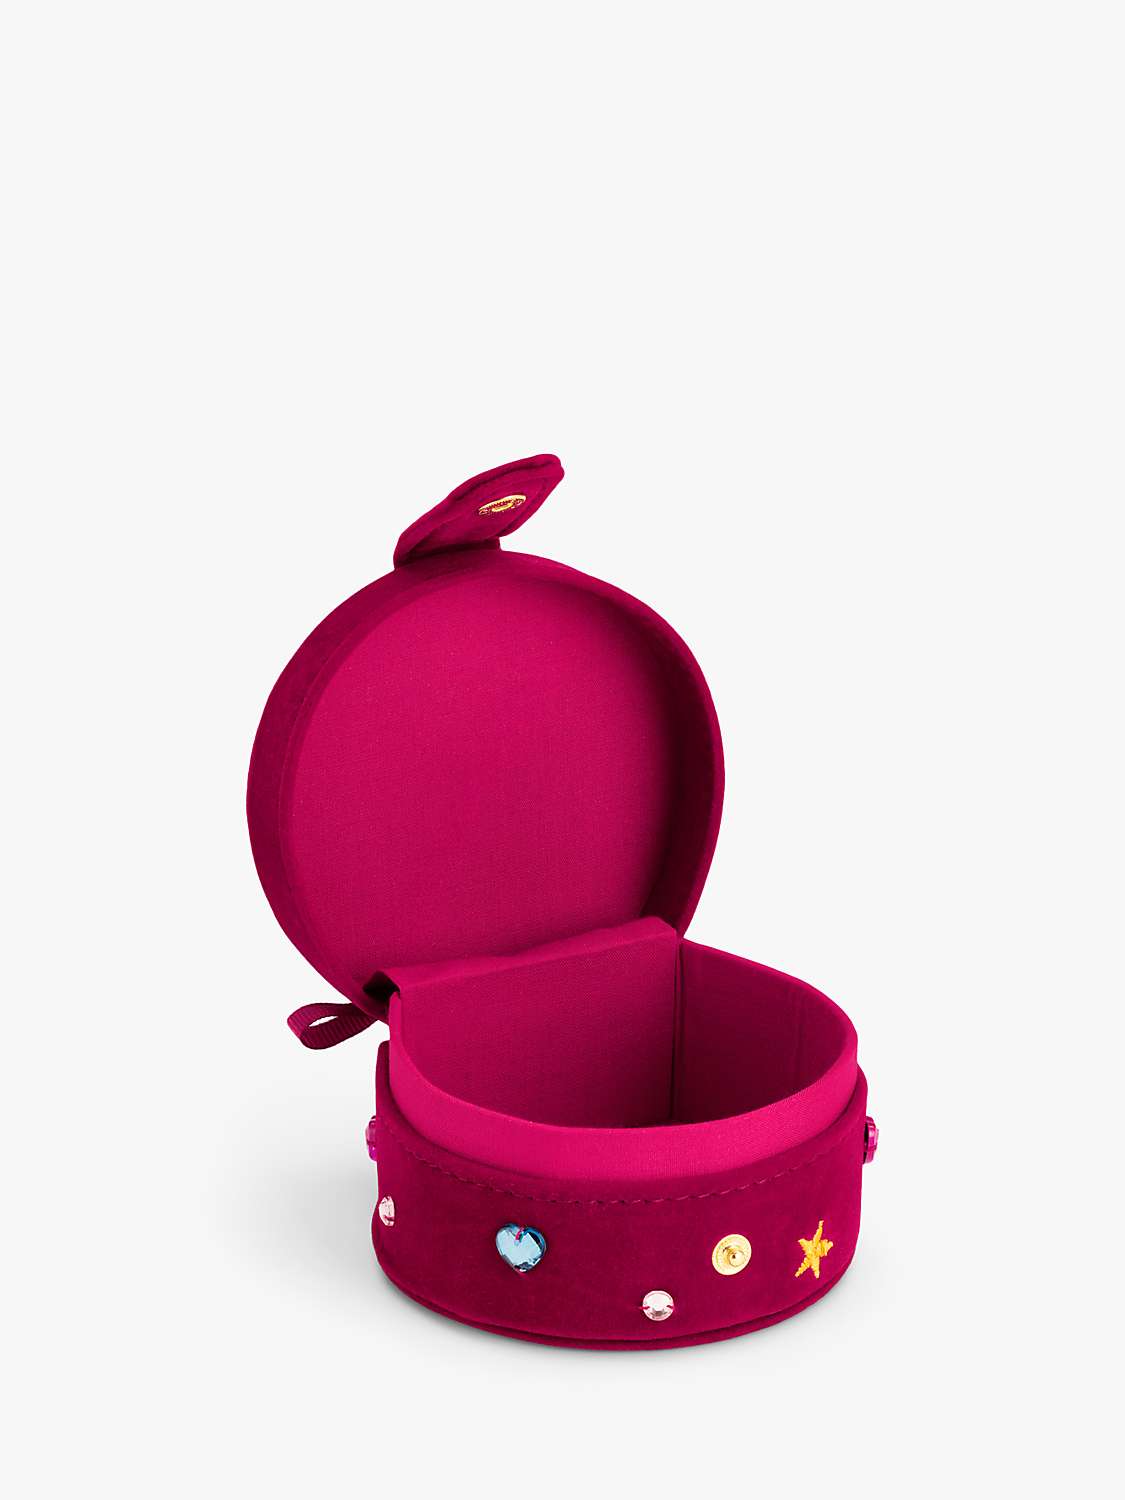 Buy Stych Kids' Gemtastic Jewellery Box, Red/Multi Online at johnlewis.com